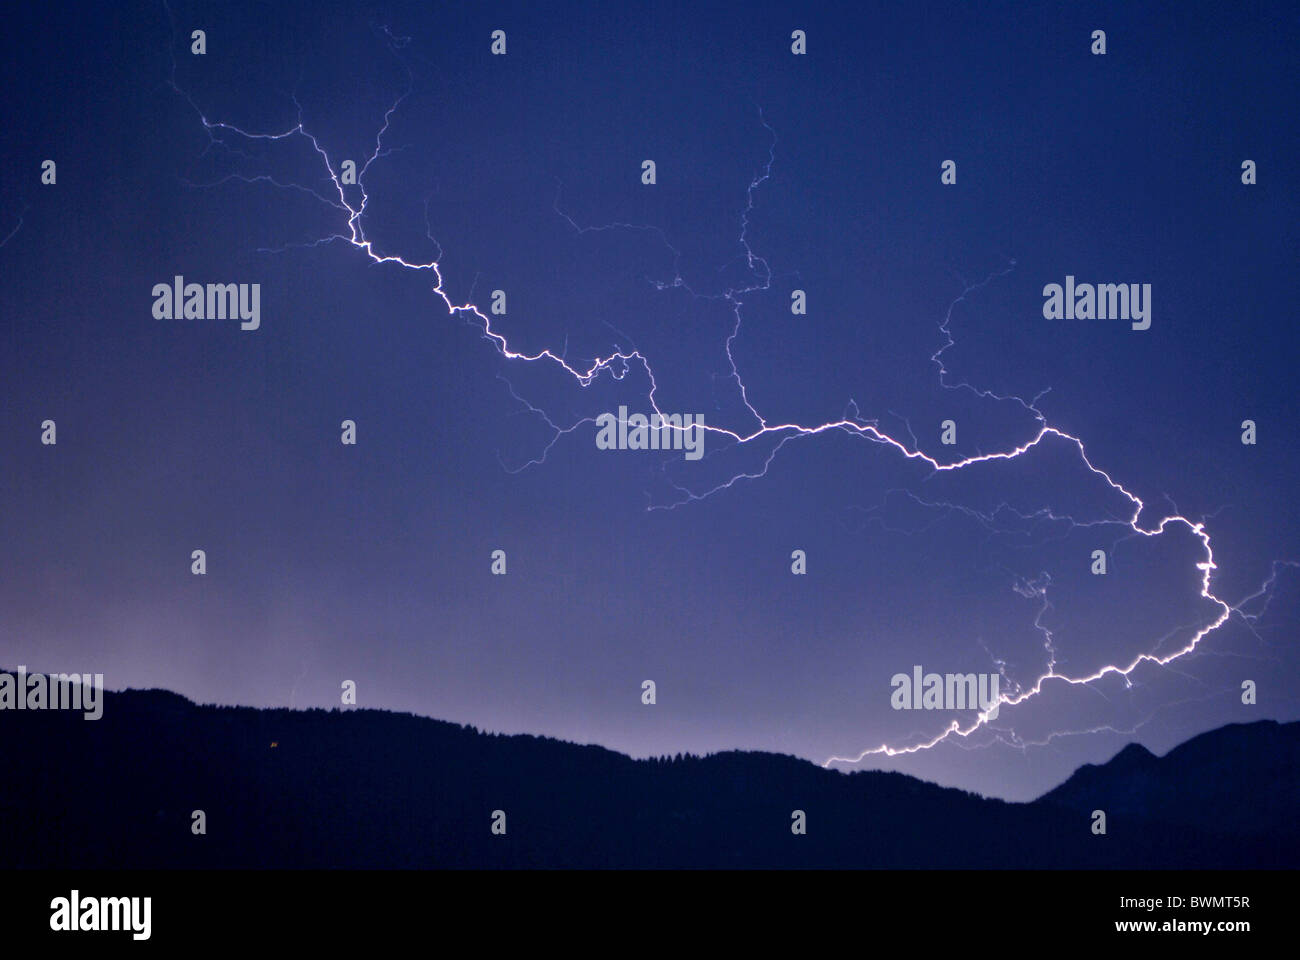 lightning in the night sky background of the Dolomites mountains Stock Photo